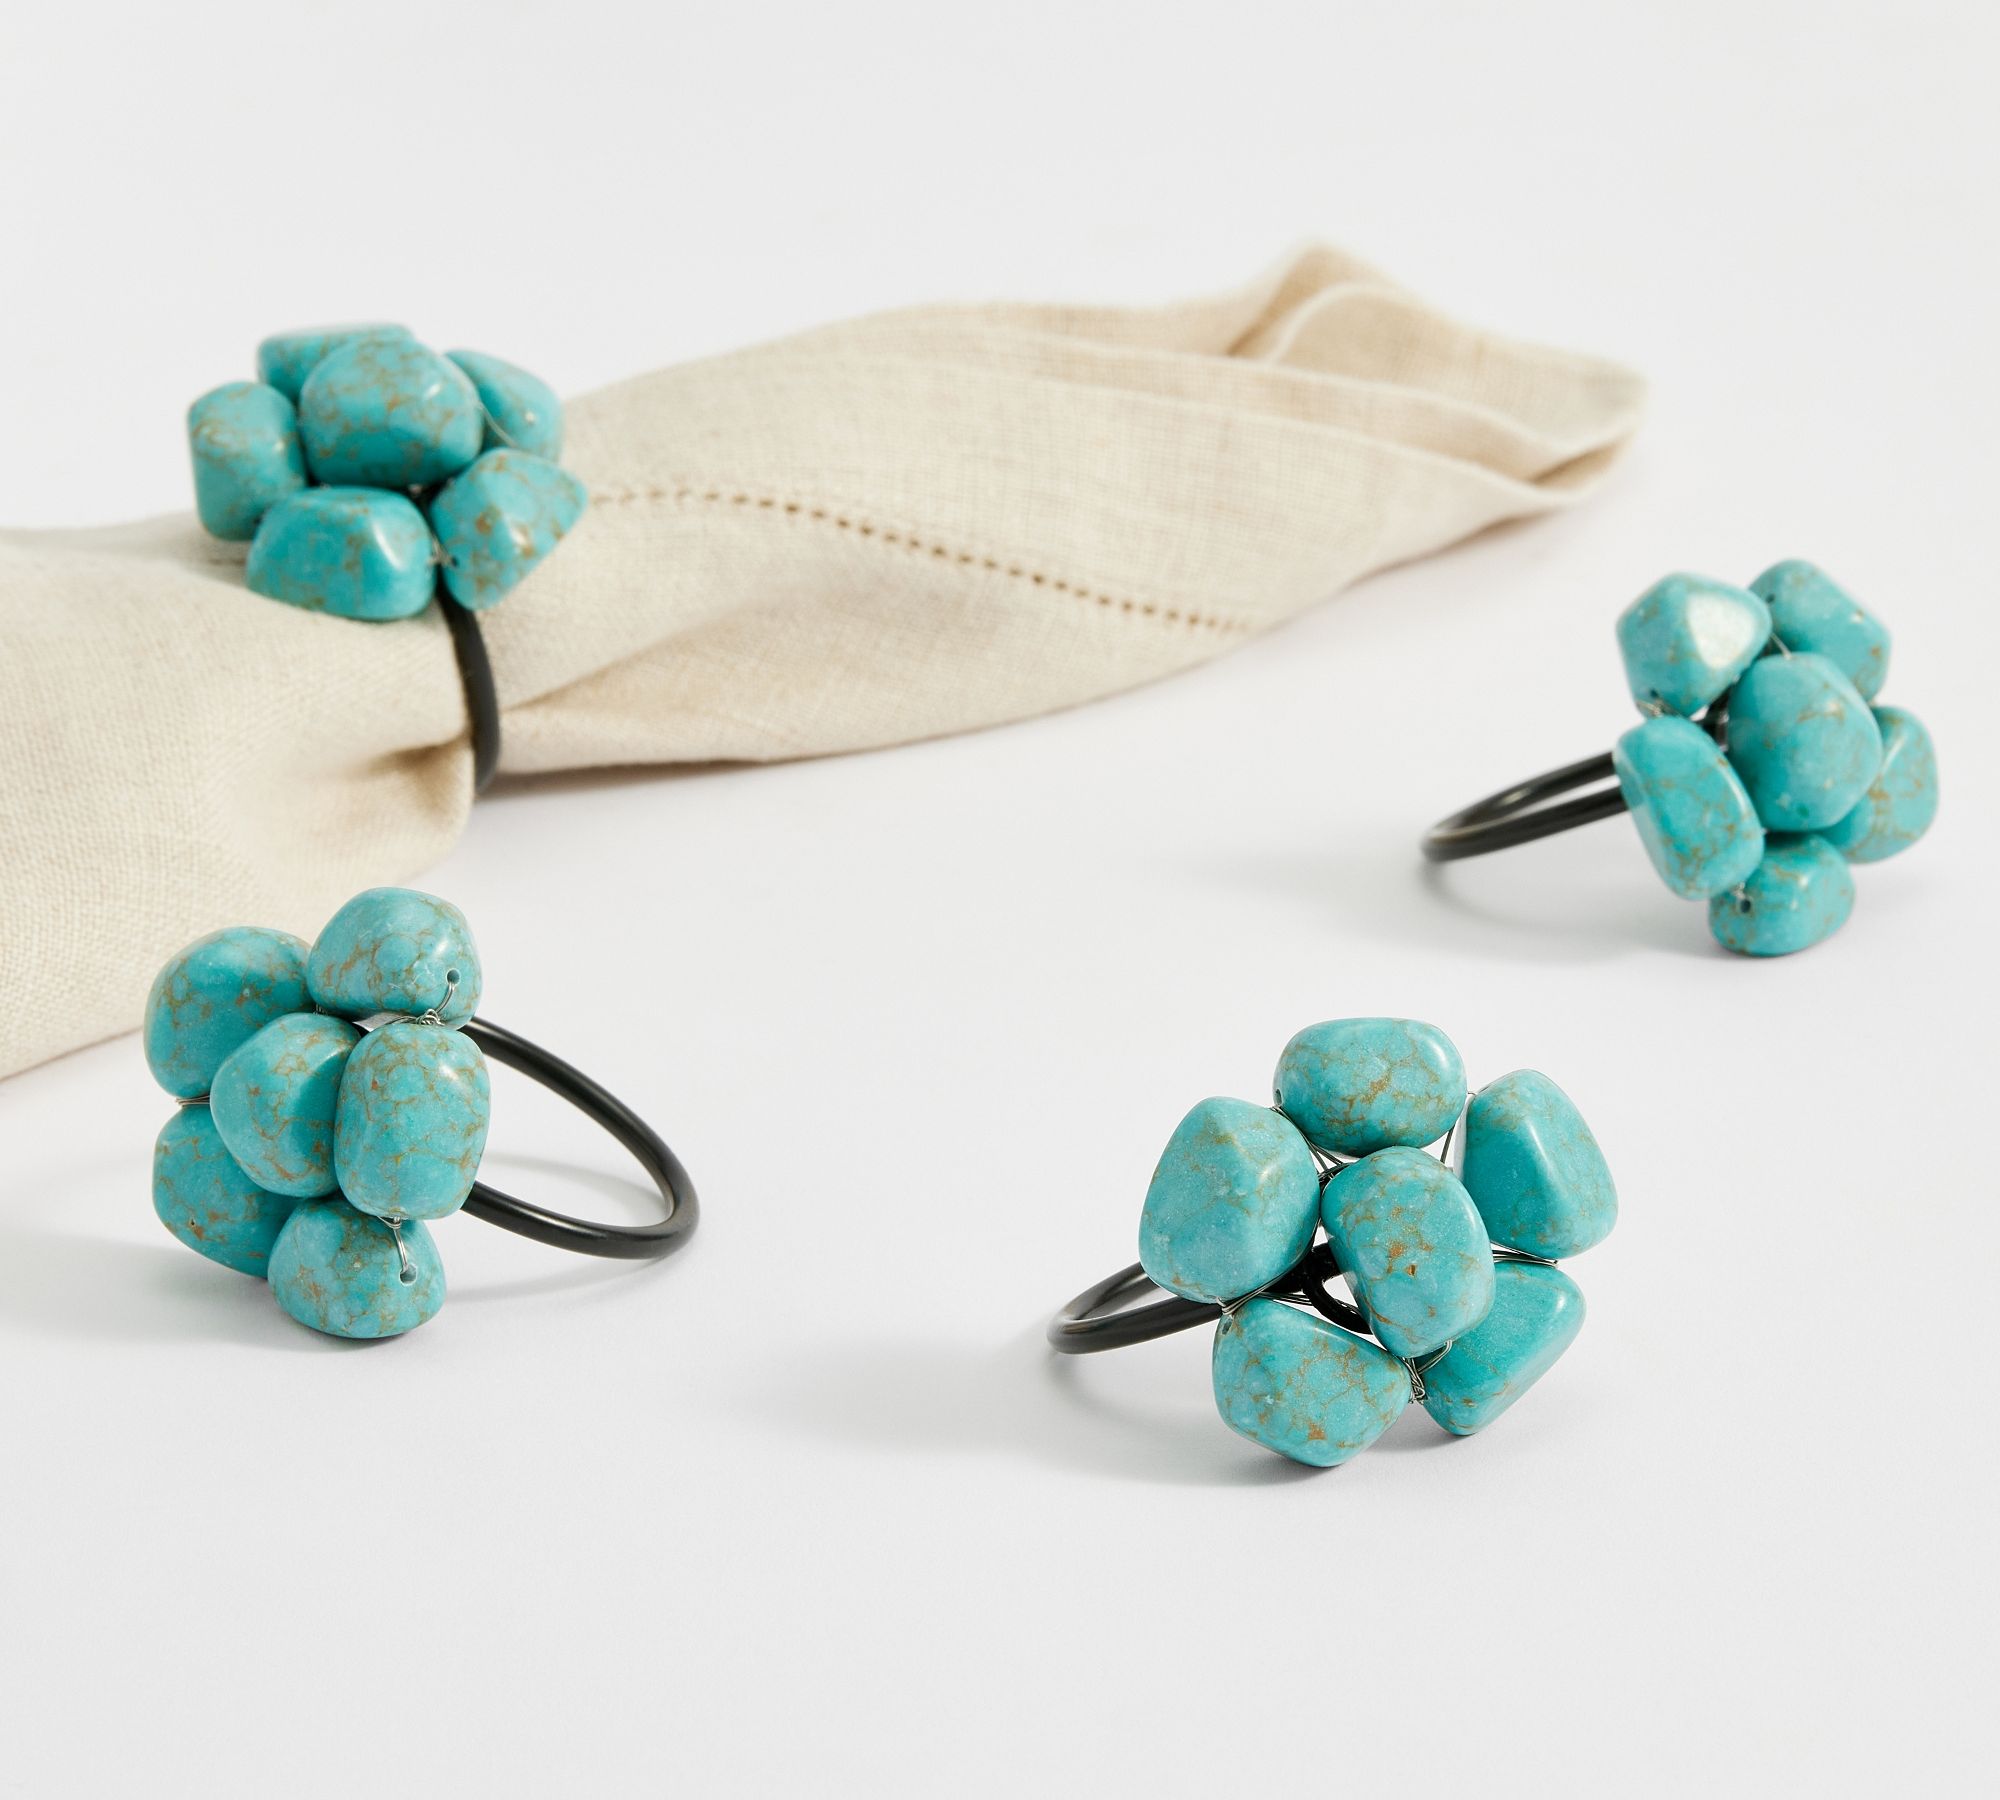 Turquoise Cluster Handcrafted Napkin Rings - Set of 4